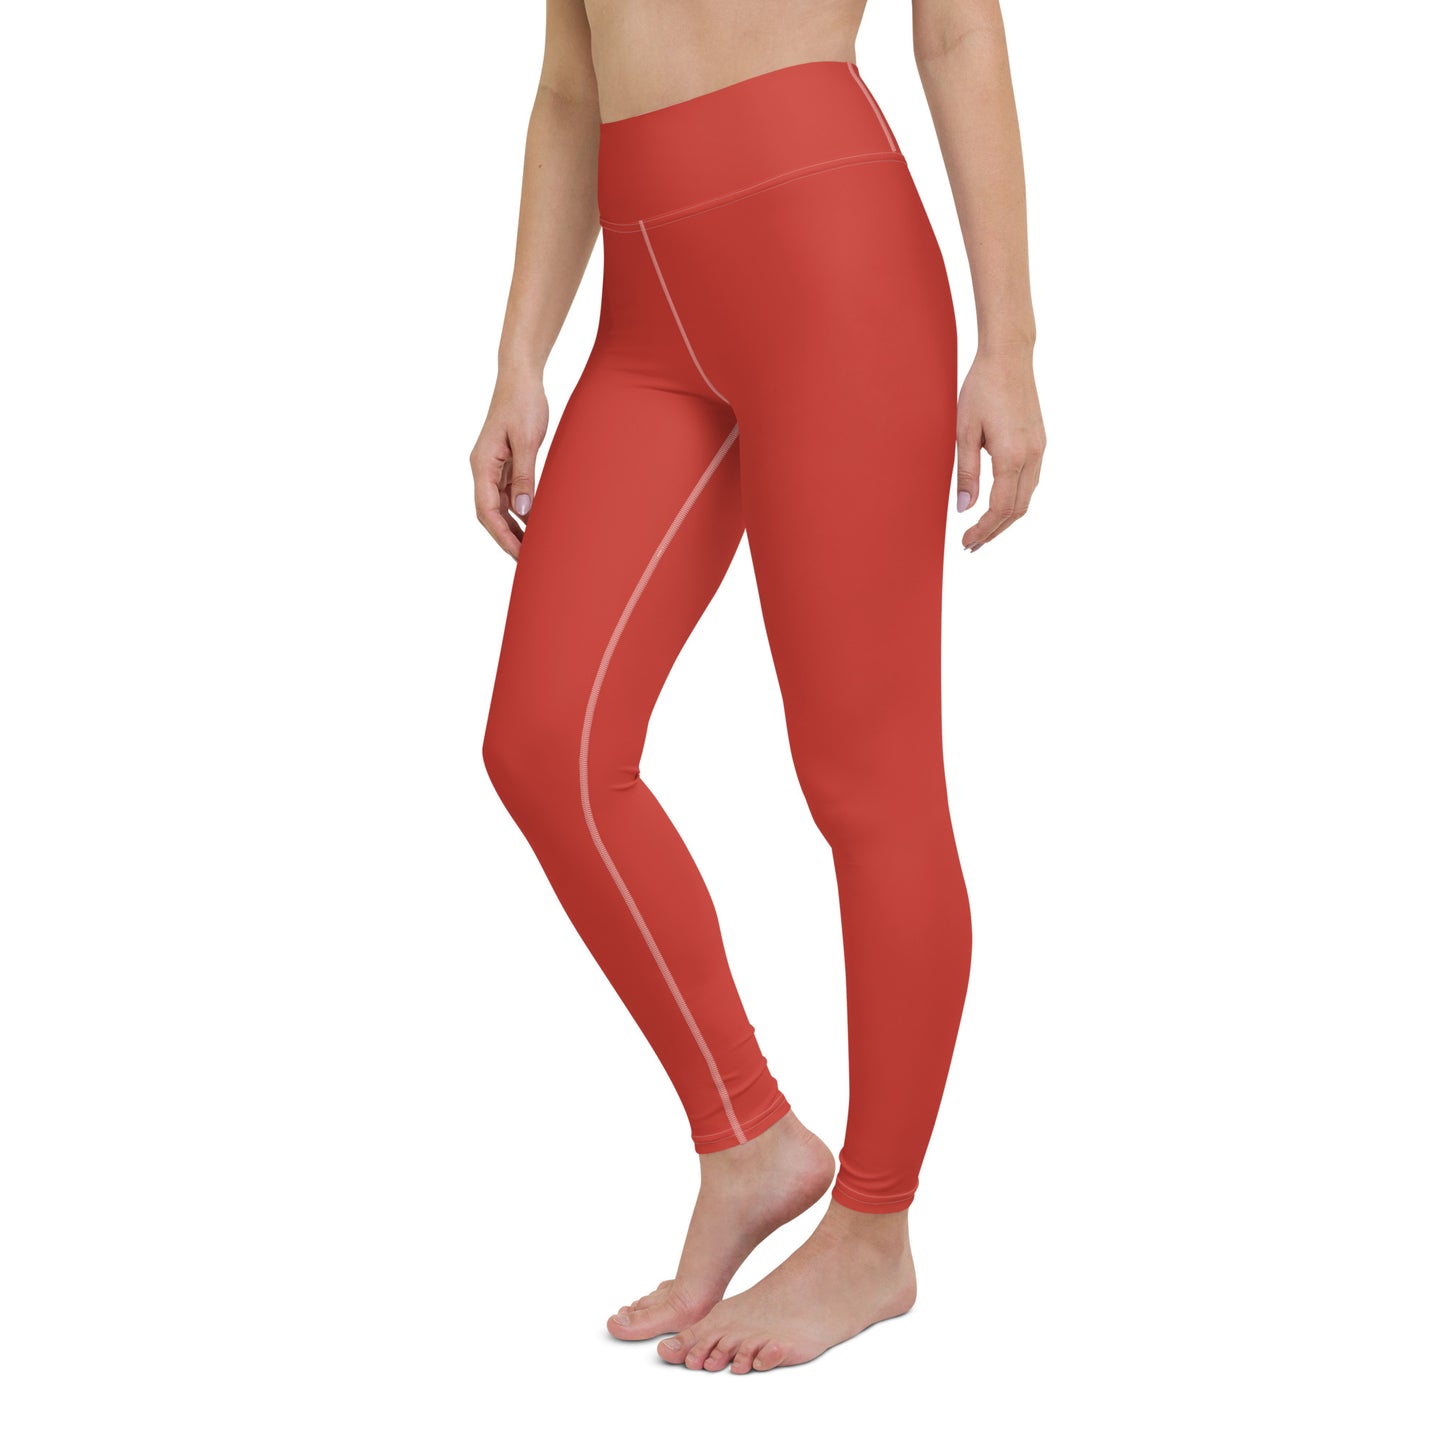 Luxe Red Yoga Leggings: Made-to-Move Comfort, Made-to-Minimize Waste